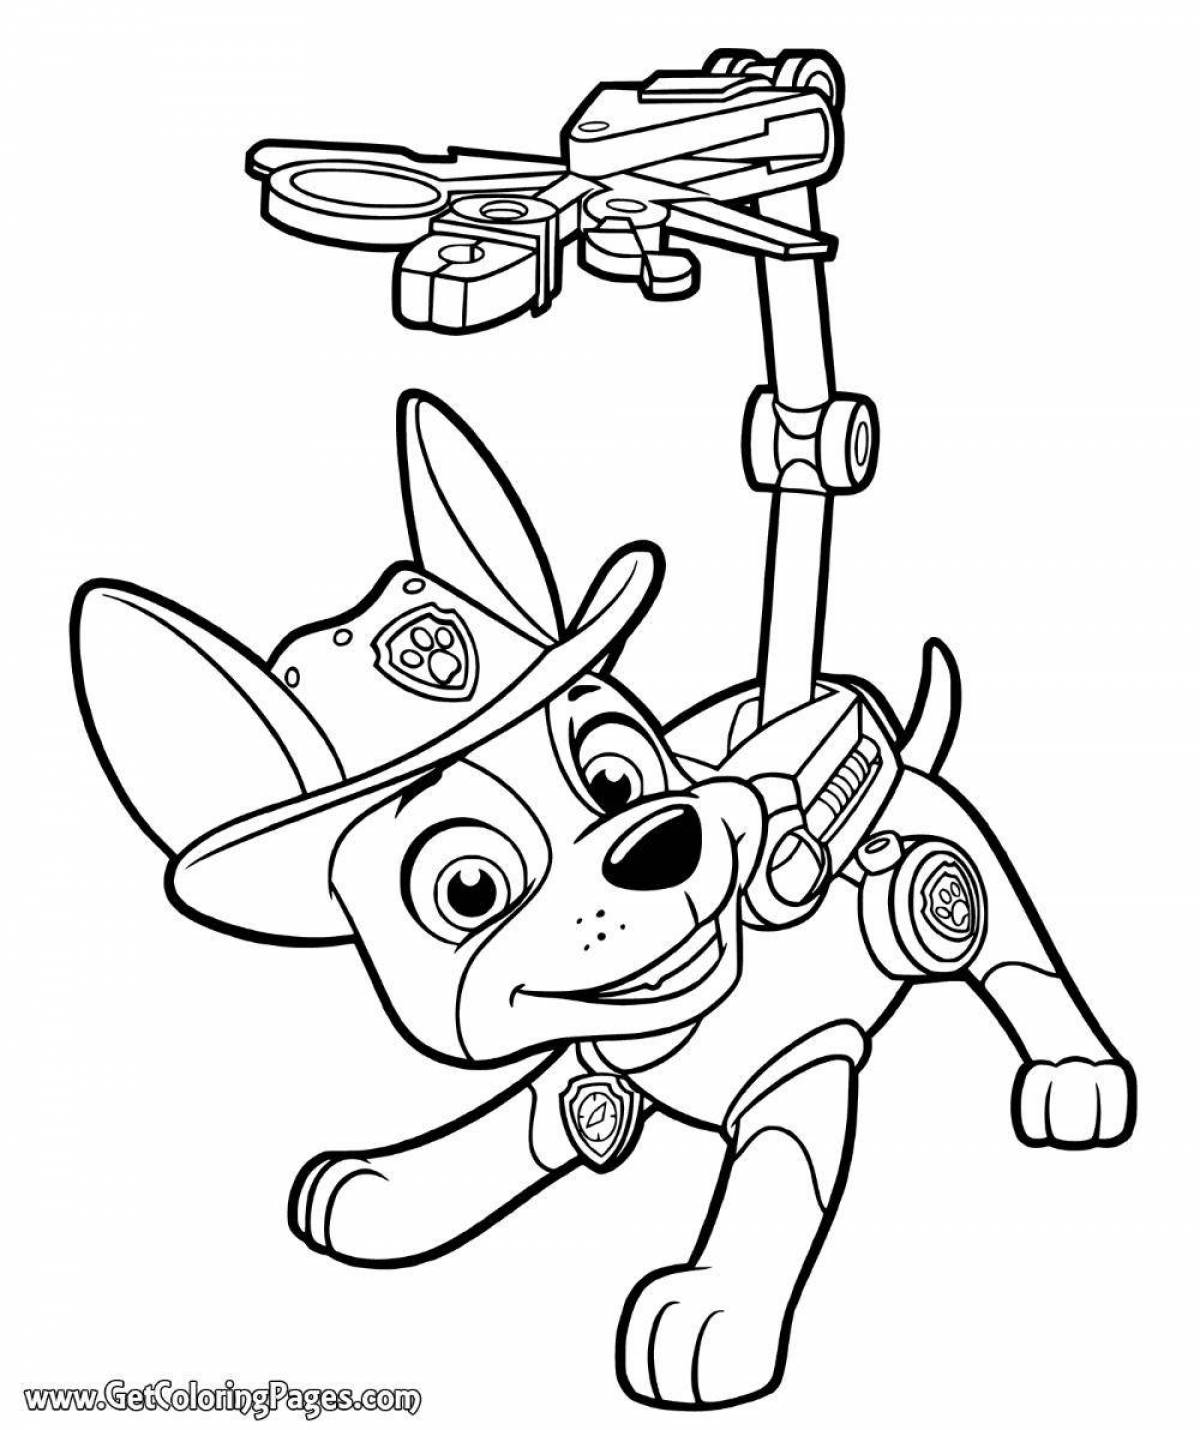 Colorful paw patrol coloring book for kids